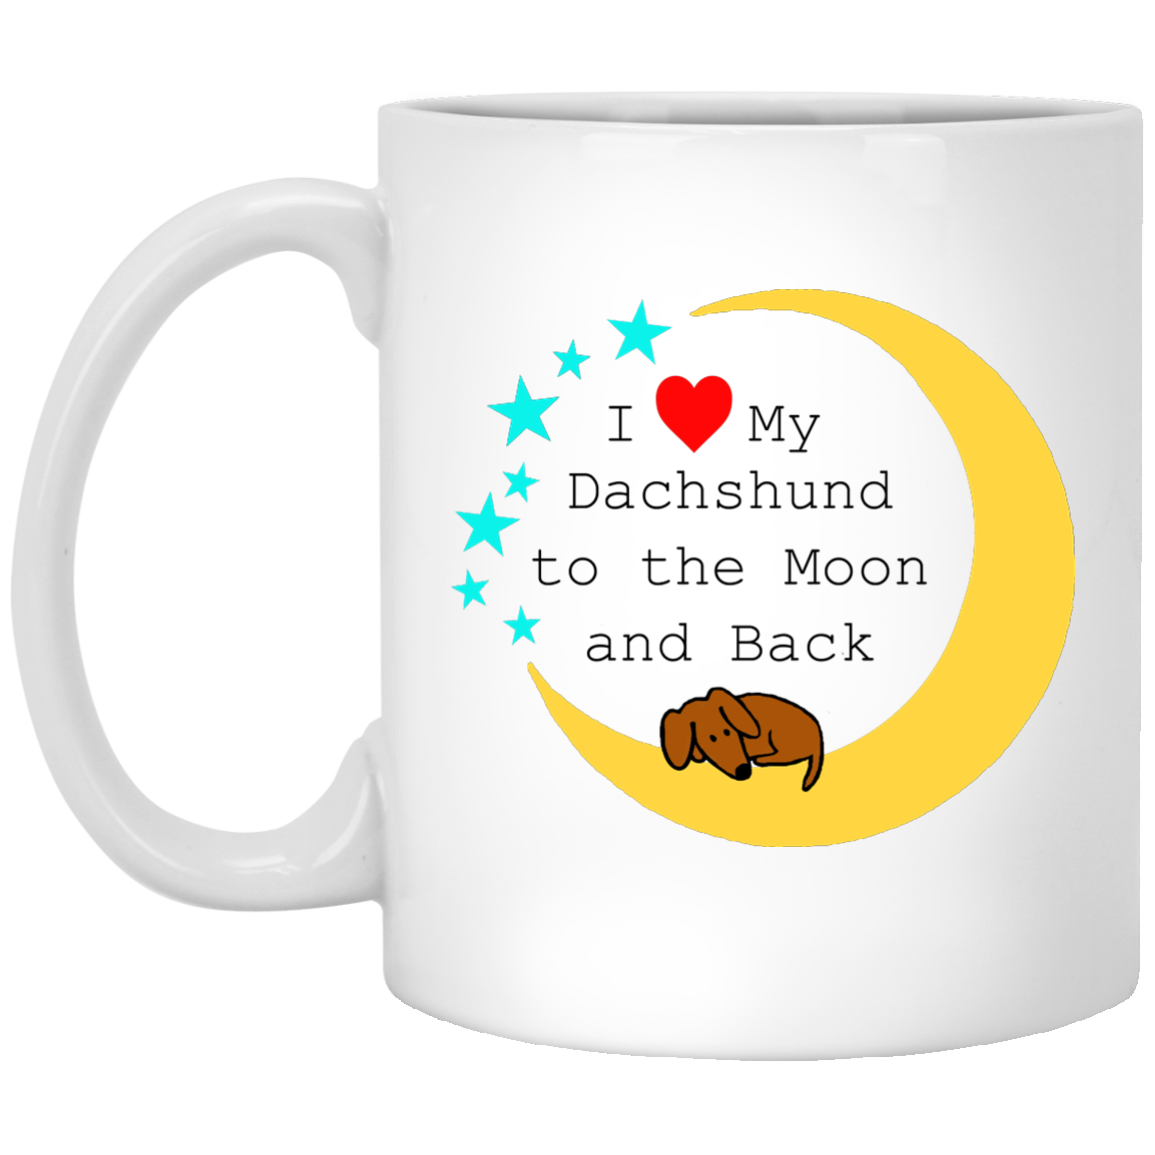 I Love My Dachshund to the Moon and Back Mugs